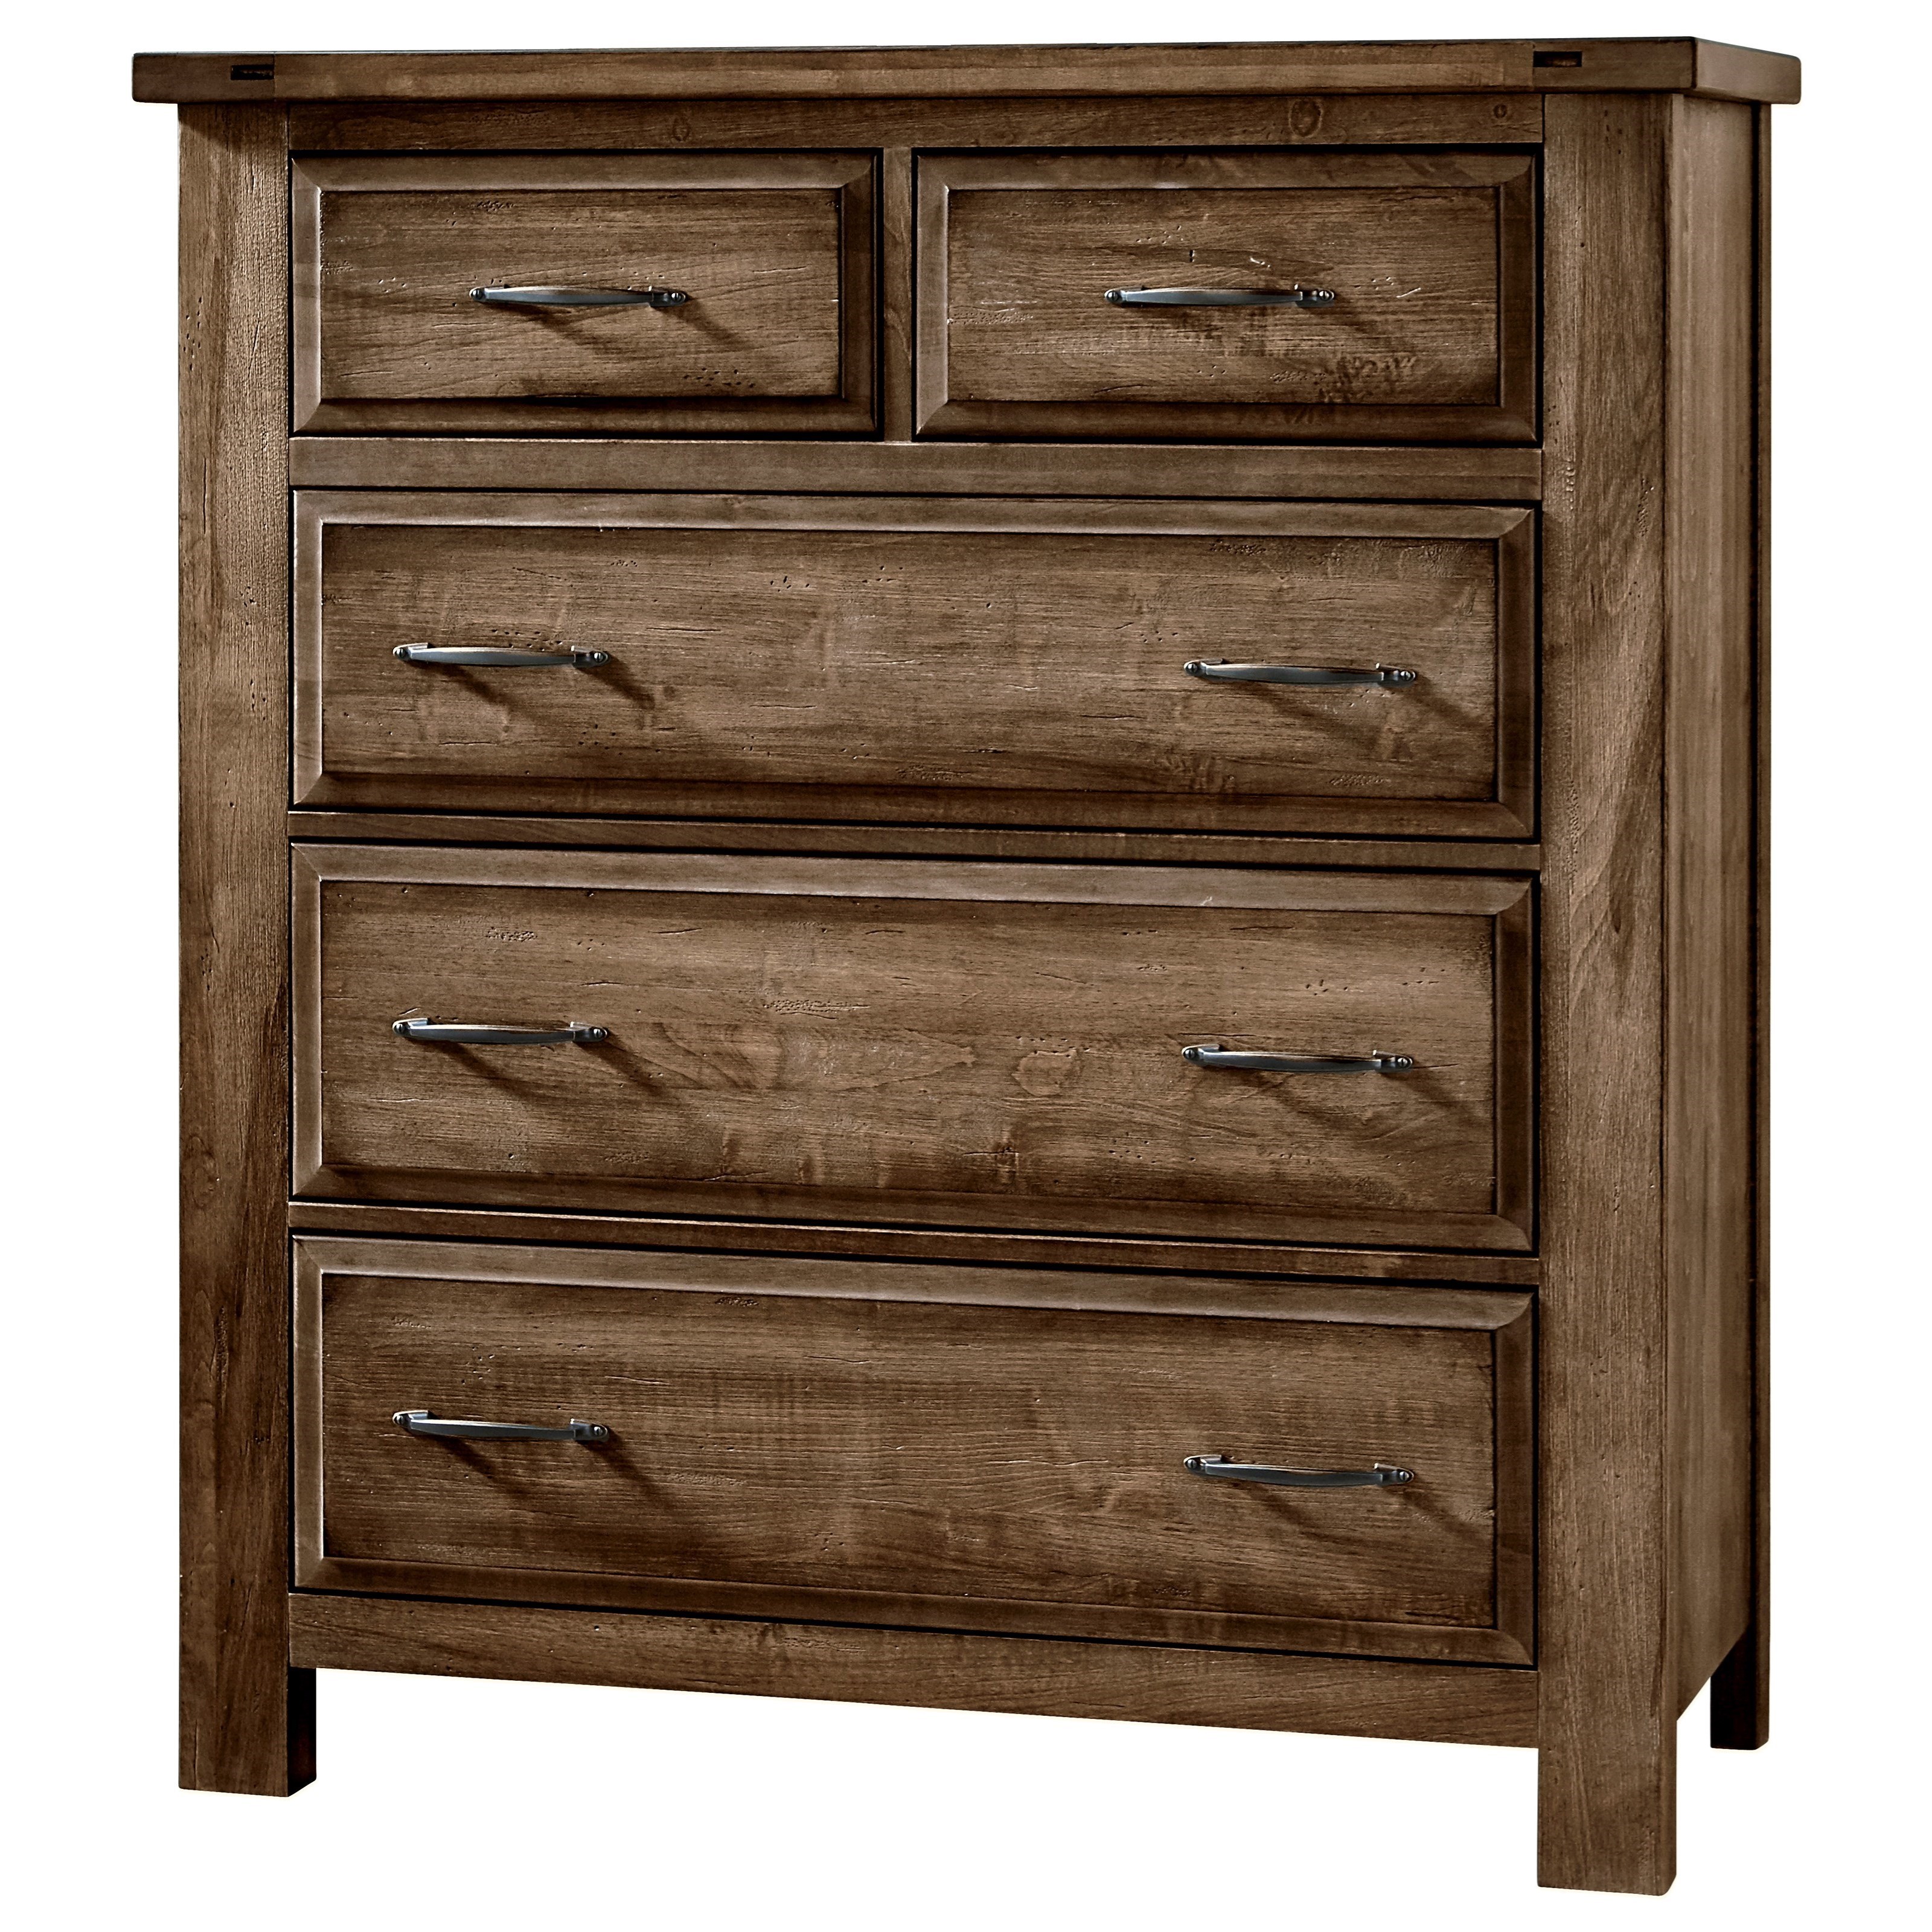 Artisan & Post Maple Road Solid Wood Chest - 5 Drawers